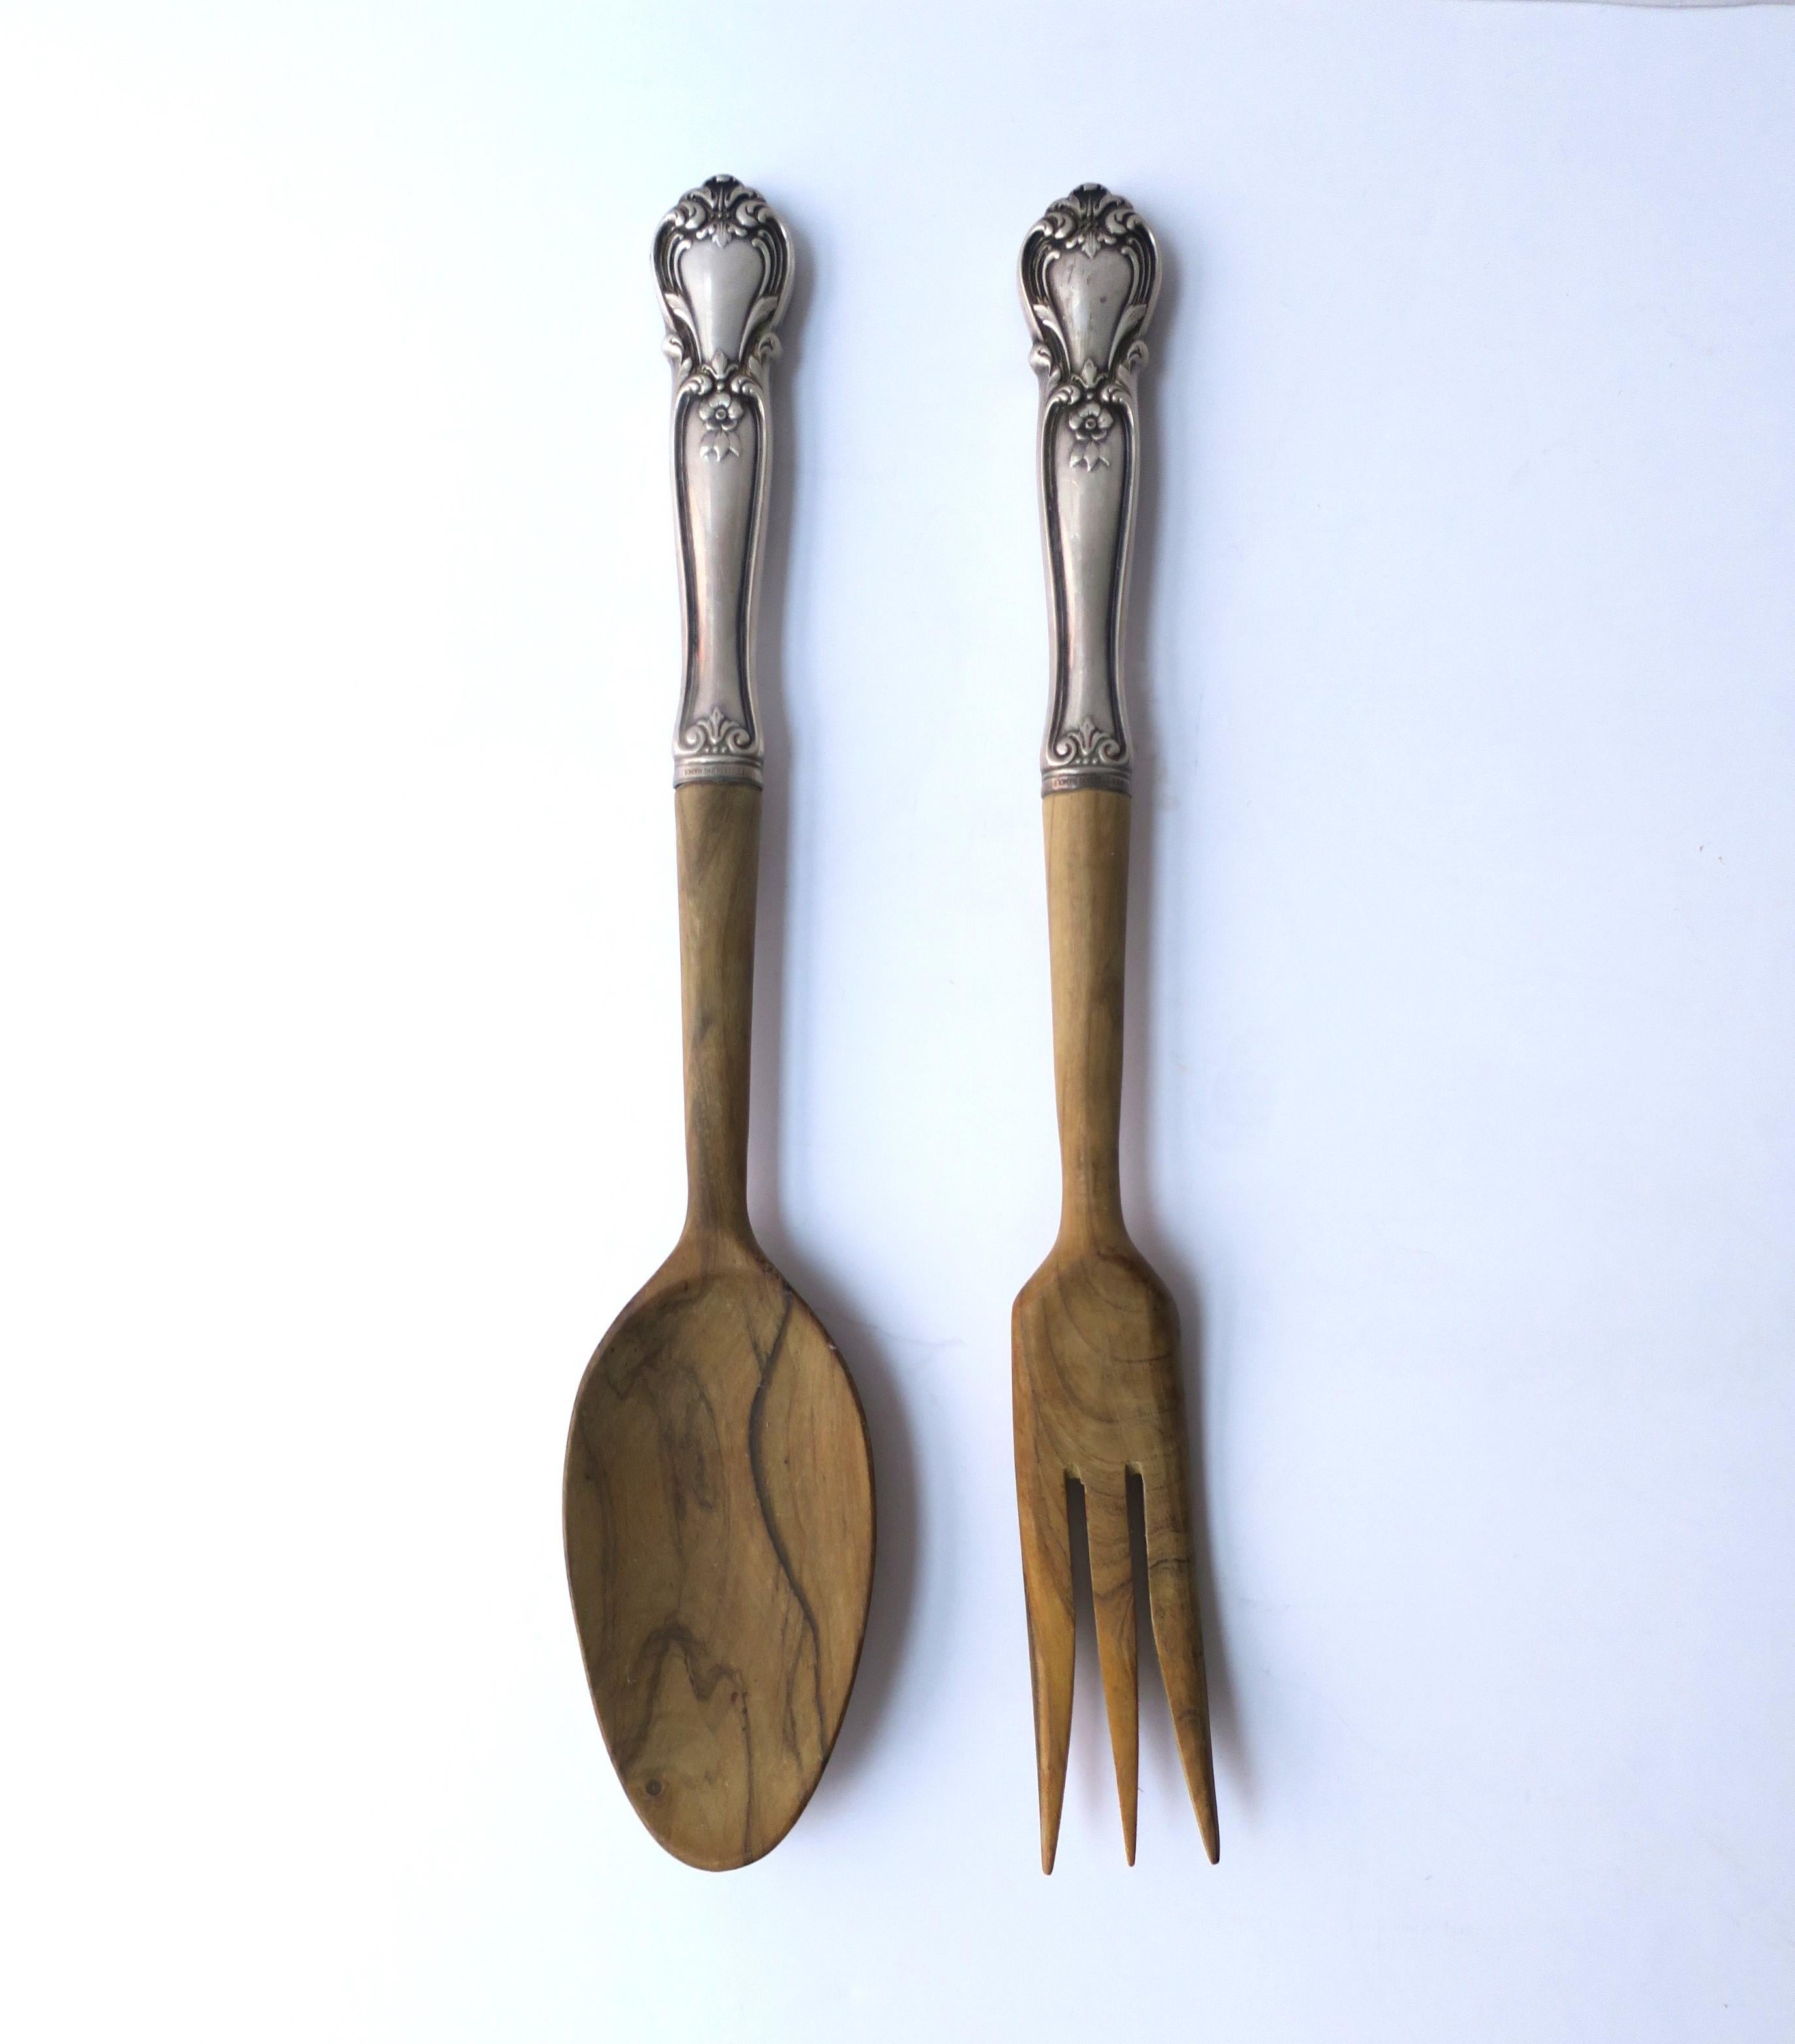 A spoon and fork sterling silver and wood salad serving utensil set. Set is wood with sterling silver handles. Handles are marked on front and back 'Sterling'. Dimensions: 10.25